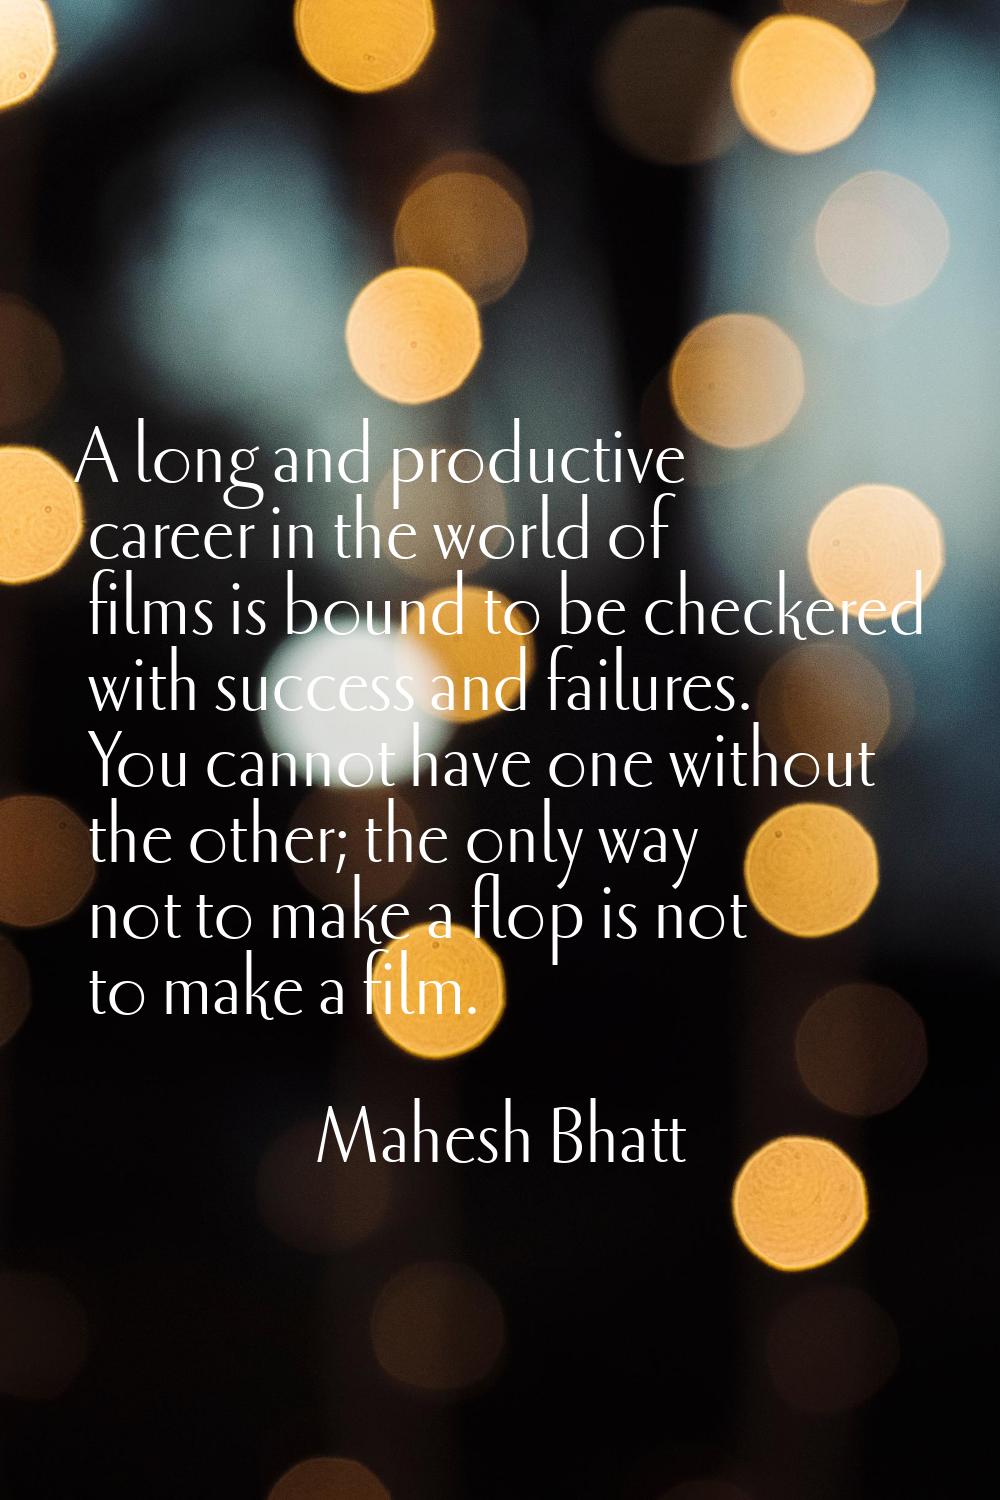 A long and productive career in the world of films is bound to be checkered with success and failur